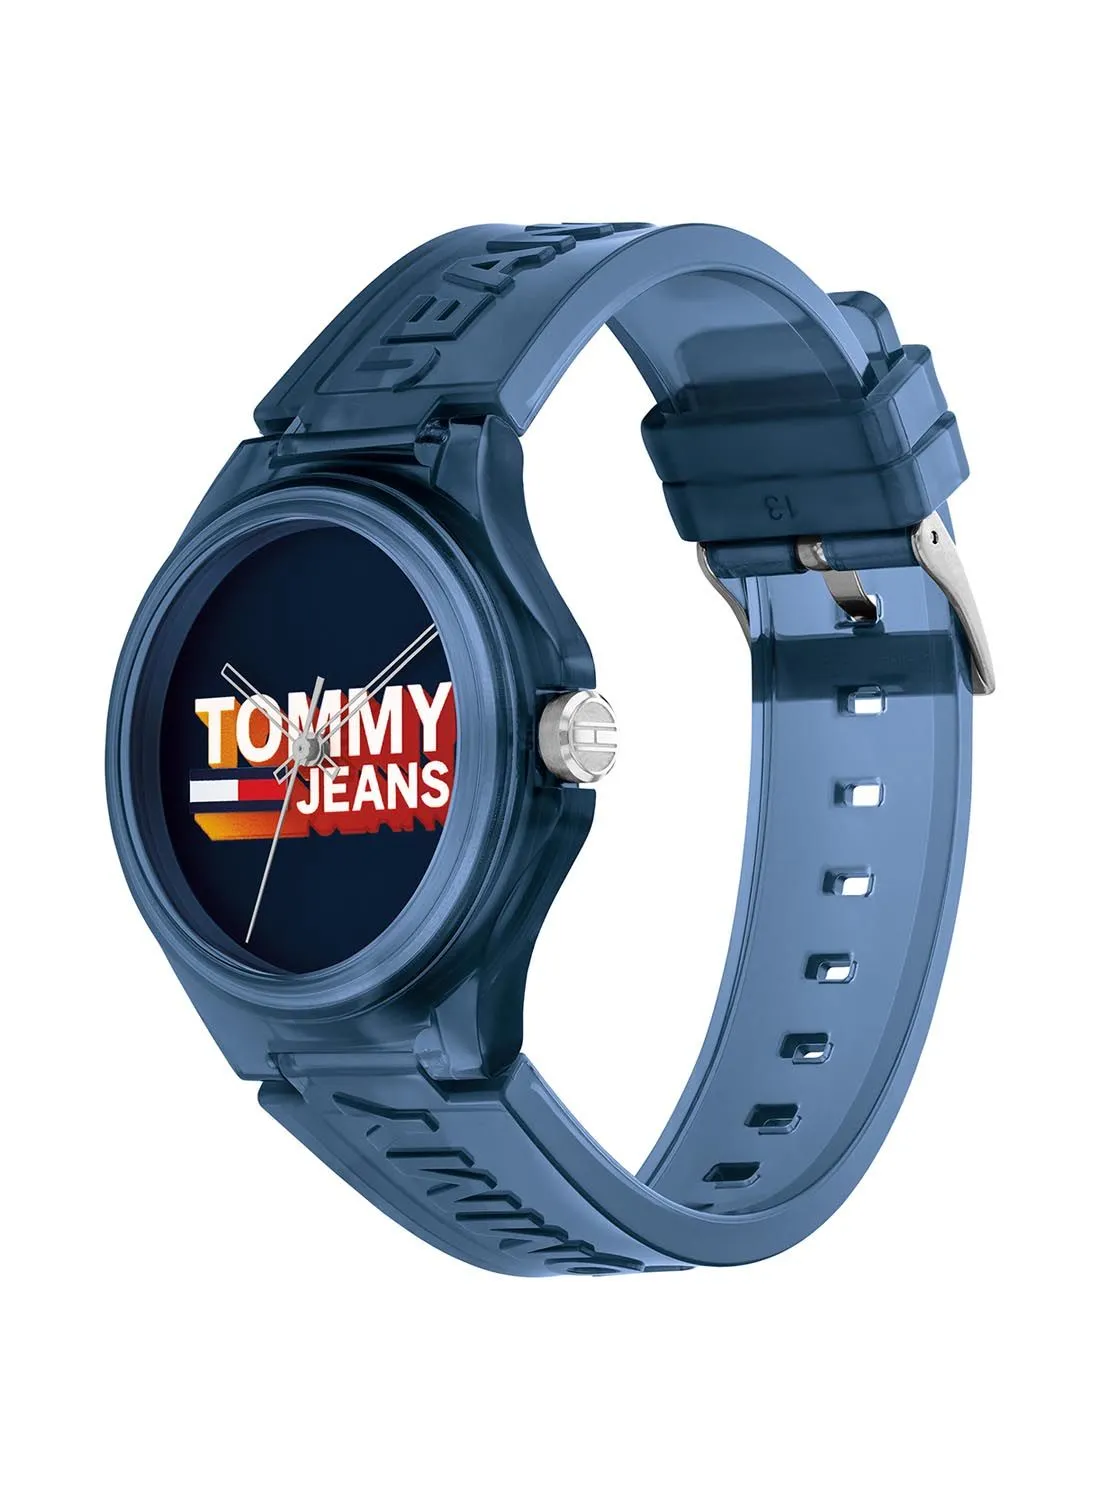 TOMMY HILFIGER TOMMY HILFIGER BERLIN UNISEX's NAVY DIAL, NAVY TRANSLUCENT SILICONE WATCH - 1720028